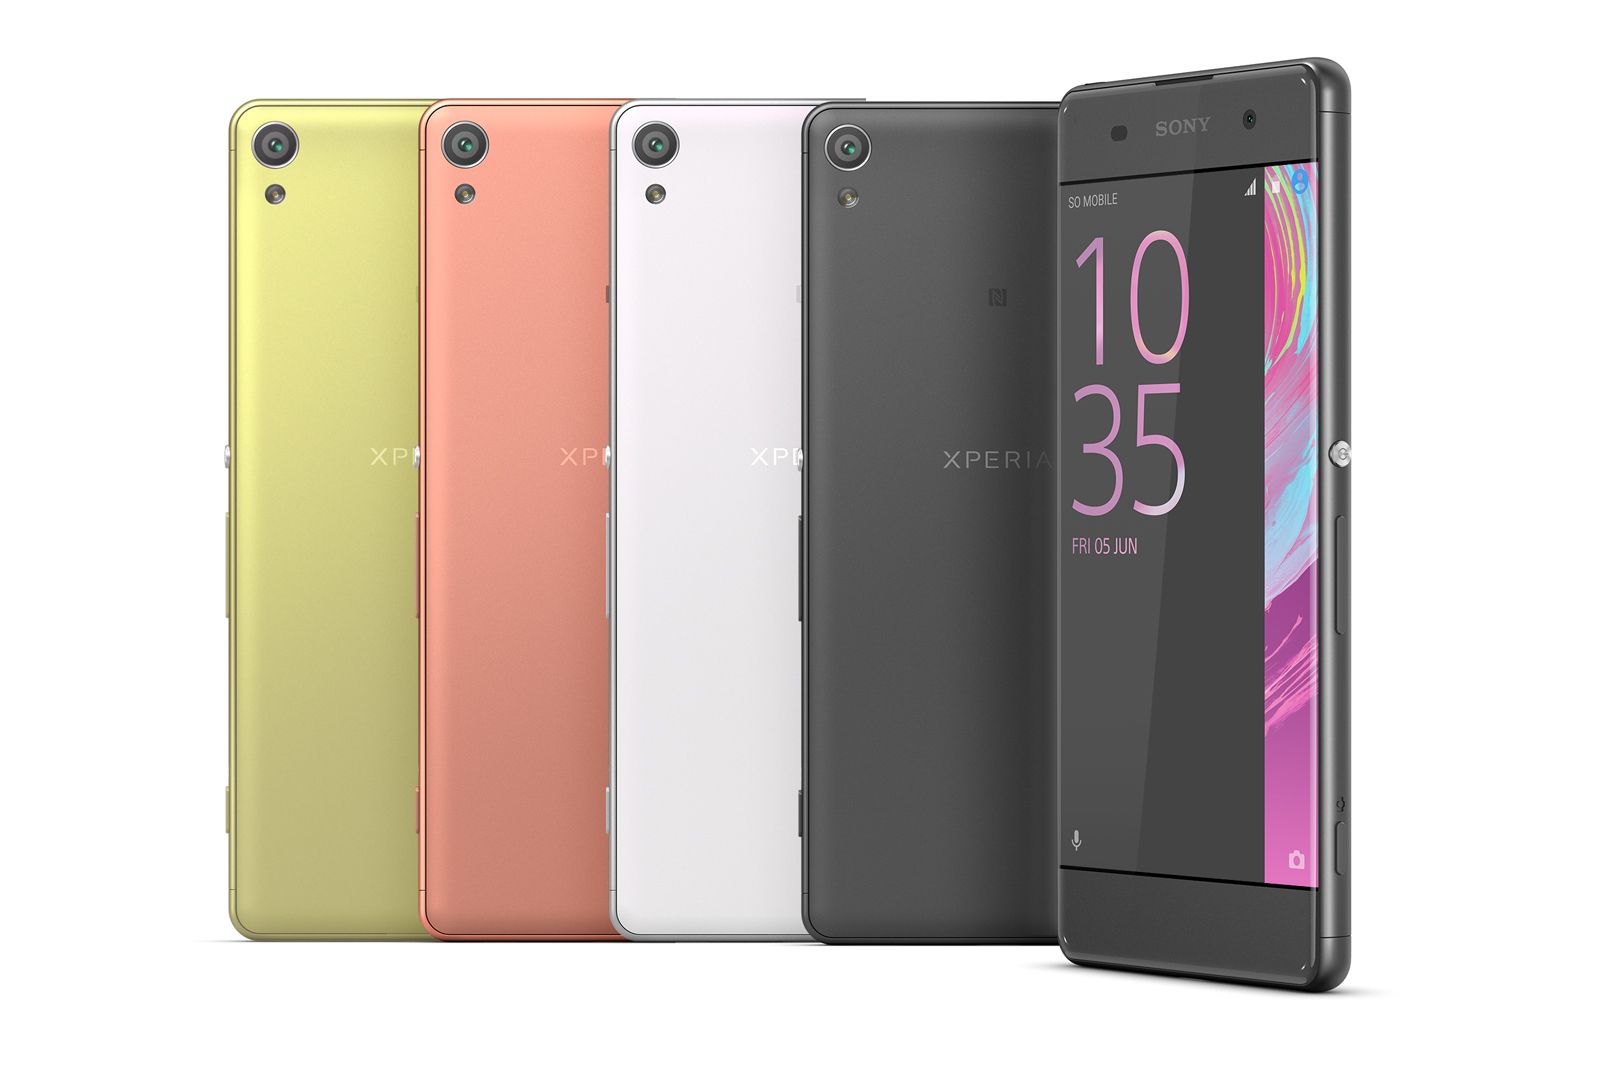 sony stokes sub flagship smartphone selection with new xperia x series image 2